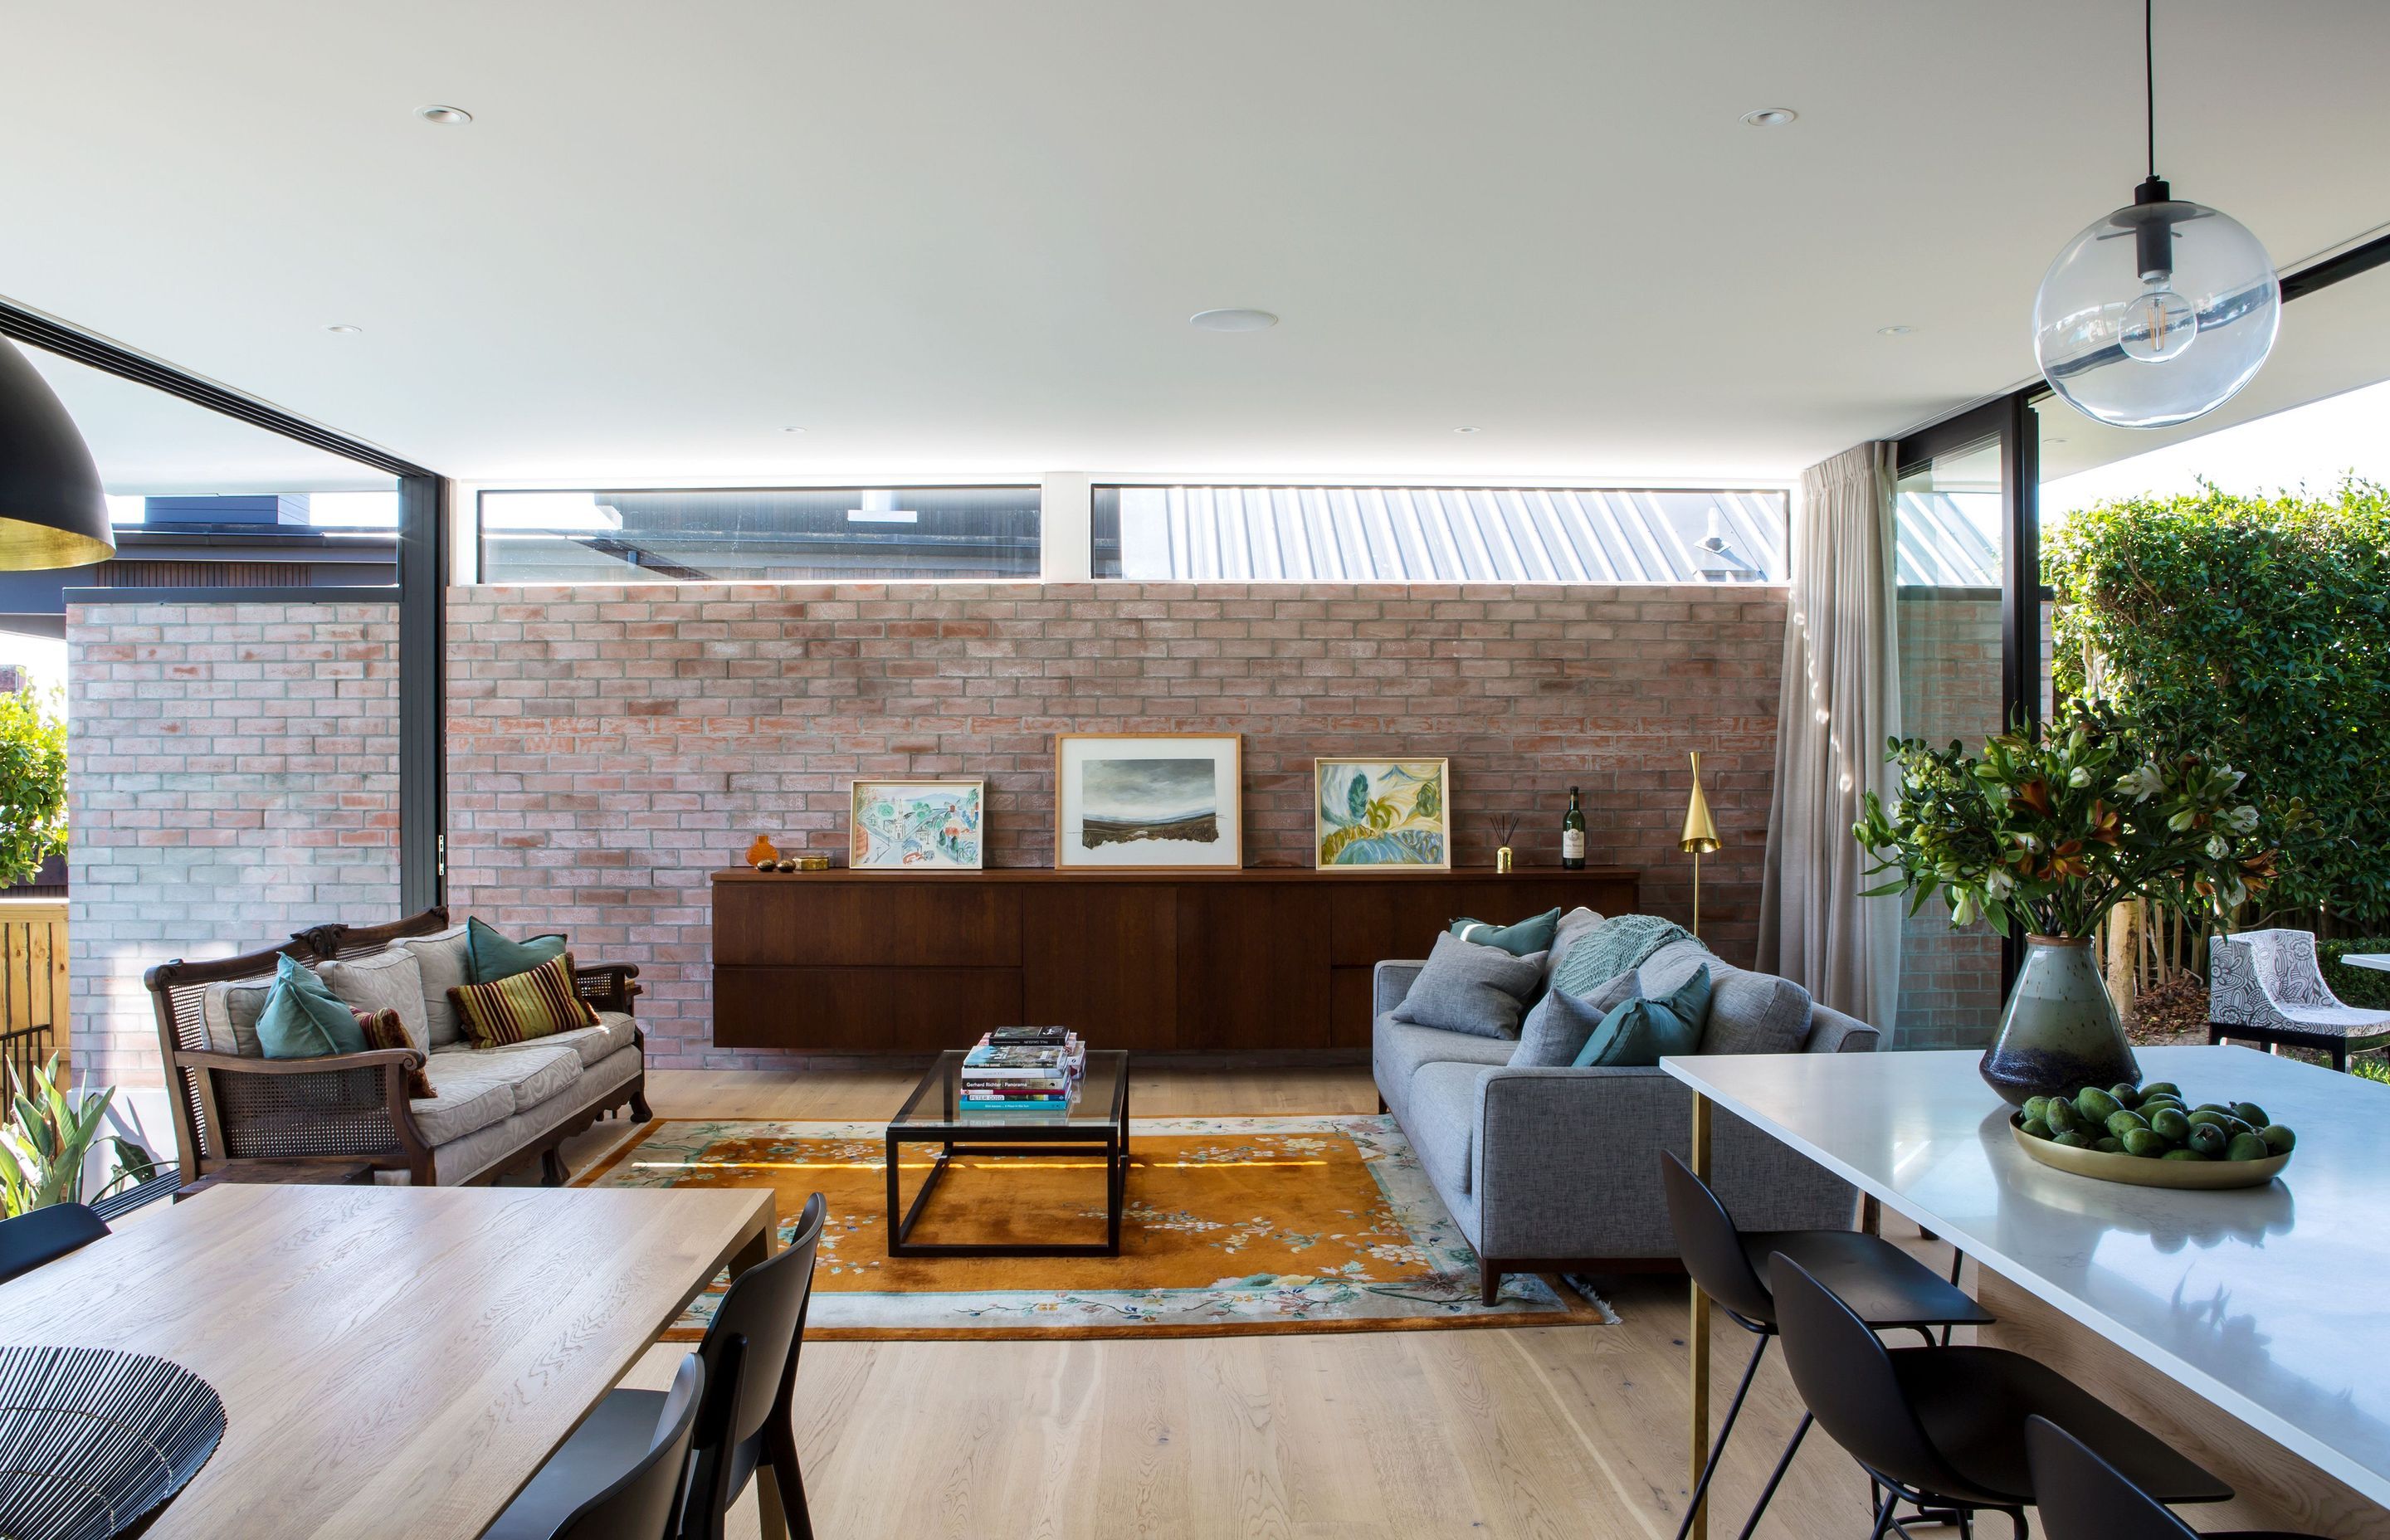 The open-plan lounge and dining area opens up on both sides to patio areas, with clerestory windows above a feature brick wall drawing light into the space.